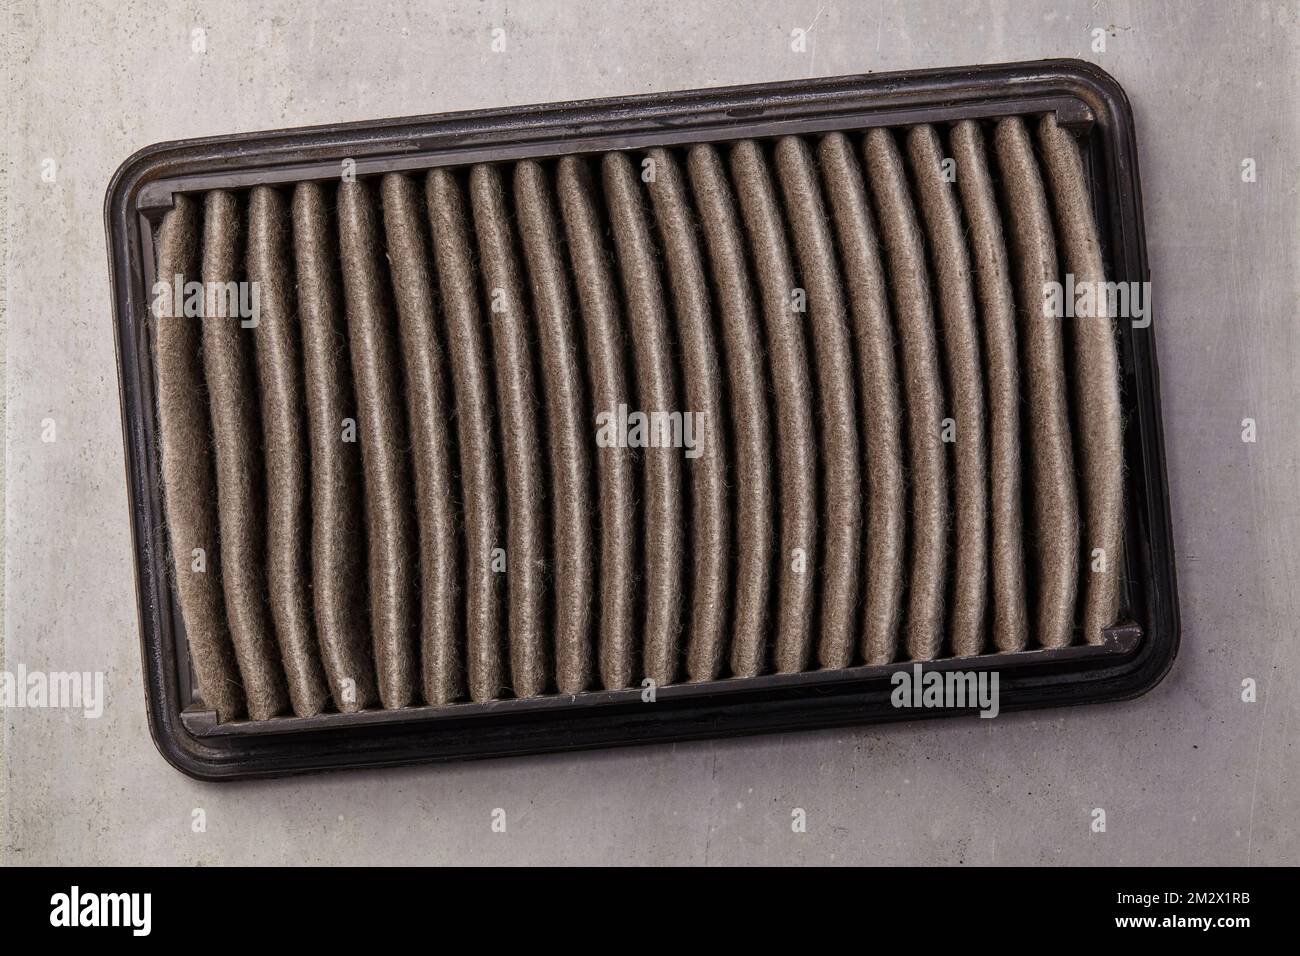 used air filter that must be replaced in the context of car maintenance Stock Photo